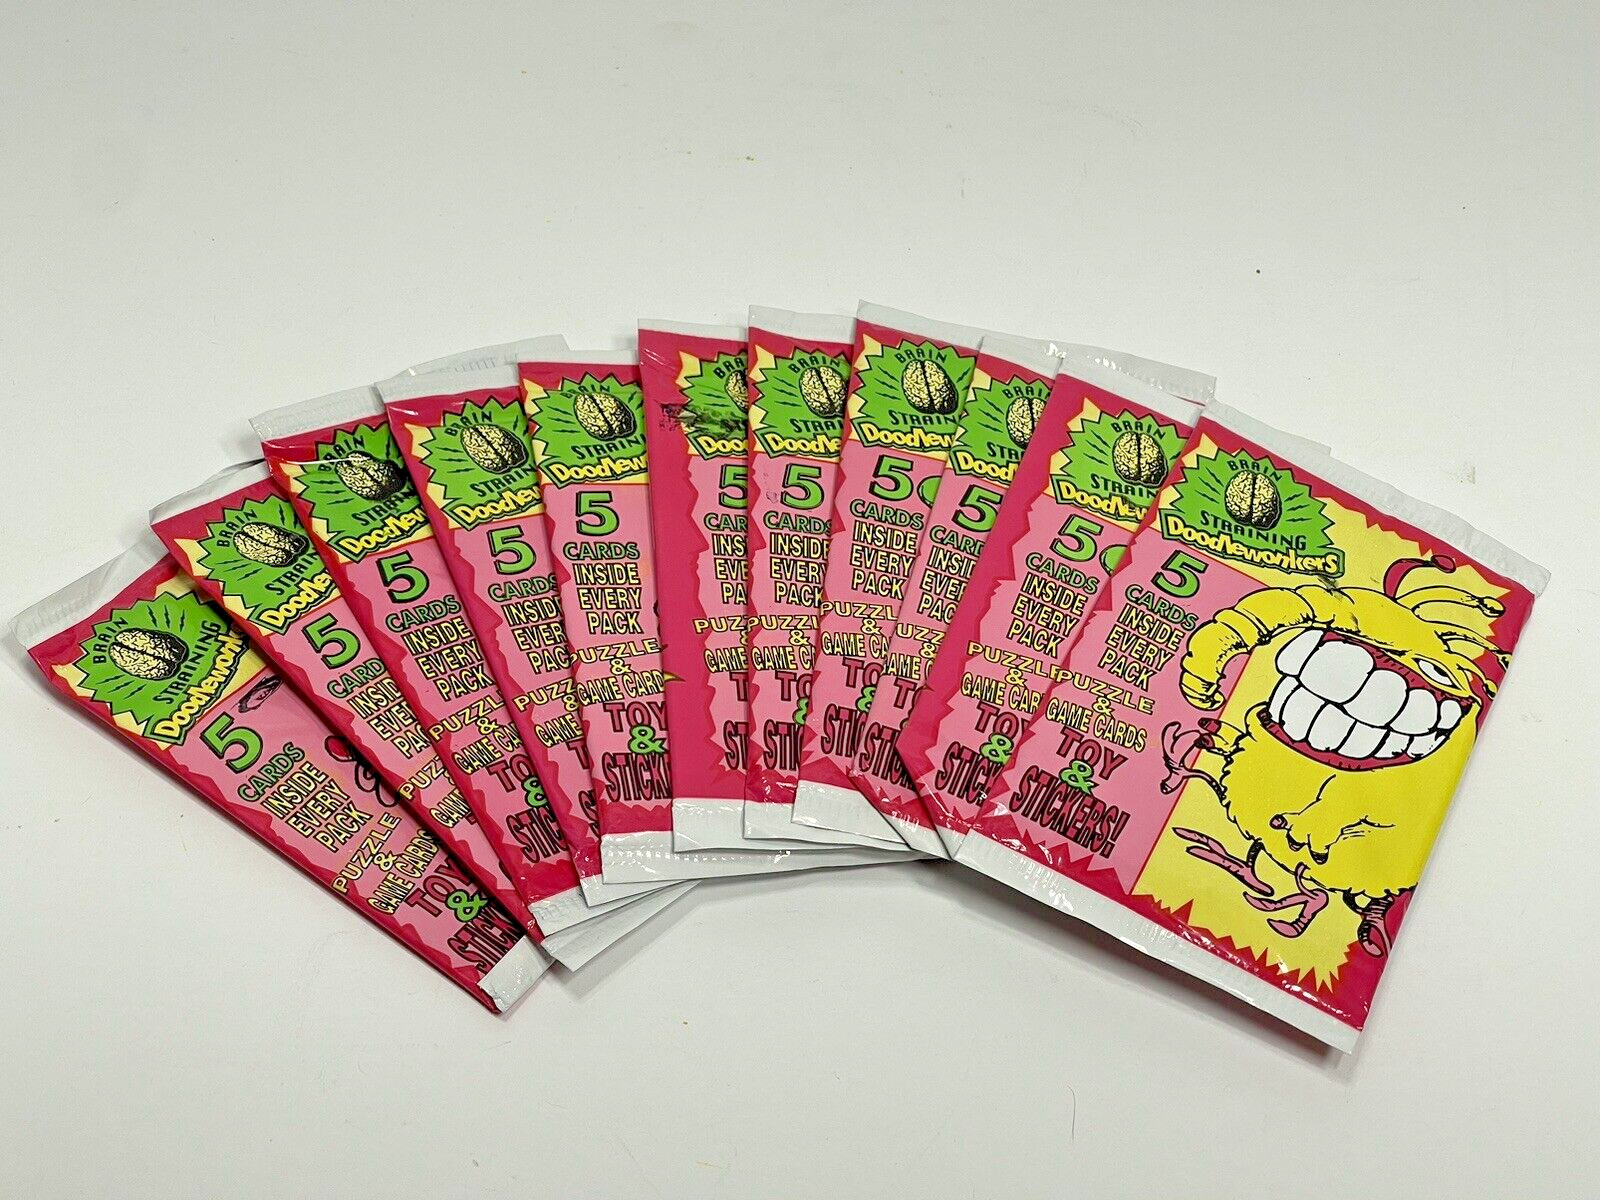 Brain Straining Doodlewonkers Vintage Trading Card Pack - Lot of 11 - Sealed/New